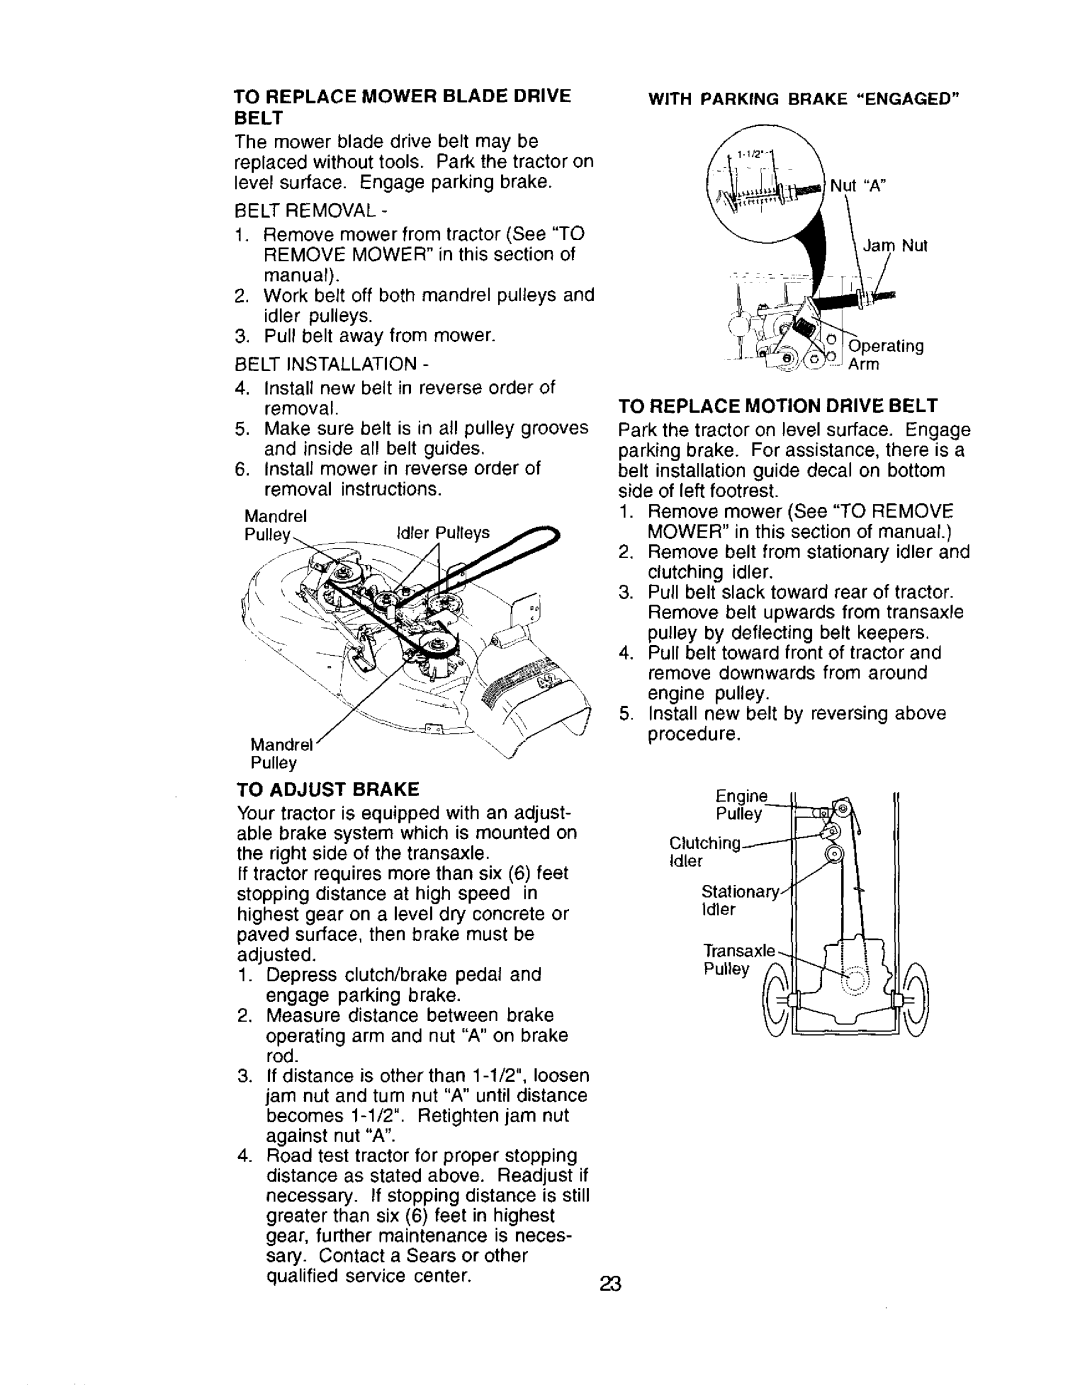 Craftsman 917.272057 To Replace Mower Blade Drive Belt, With Parking Brake Engaged, To Replace Motion Drive Belt 